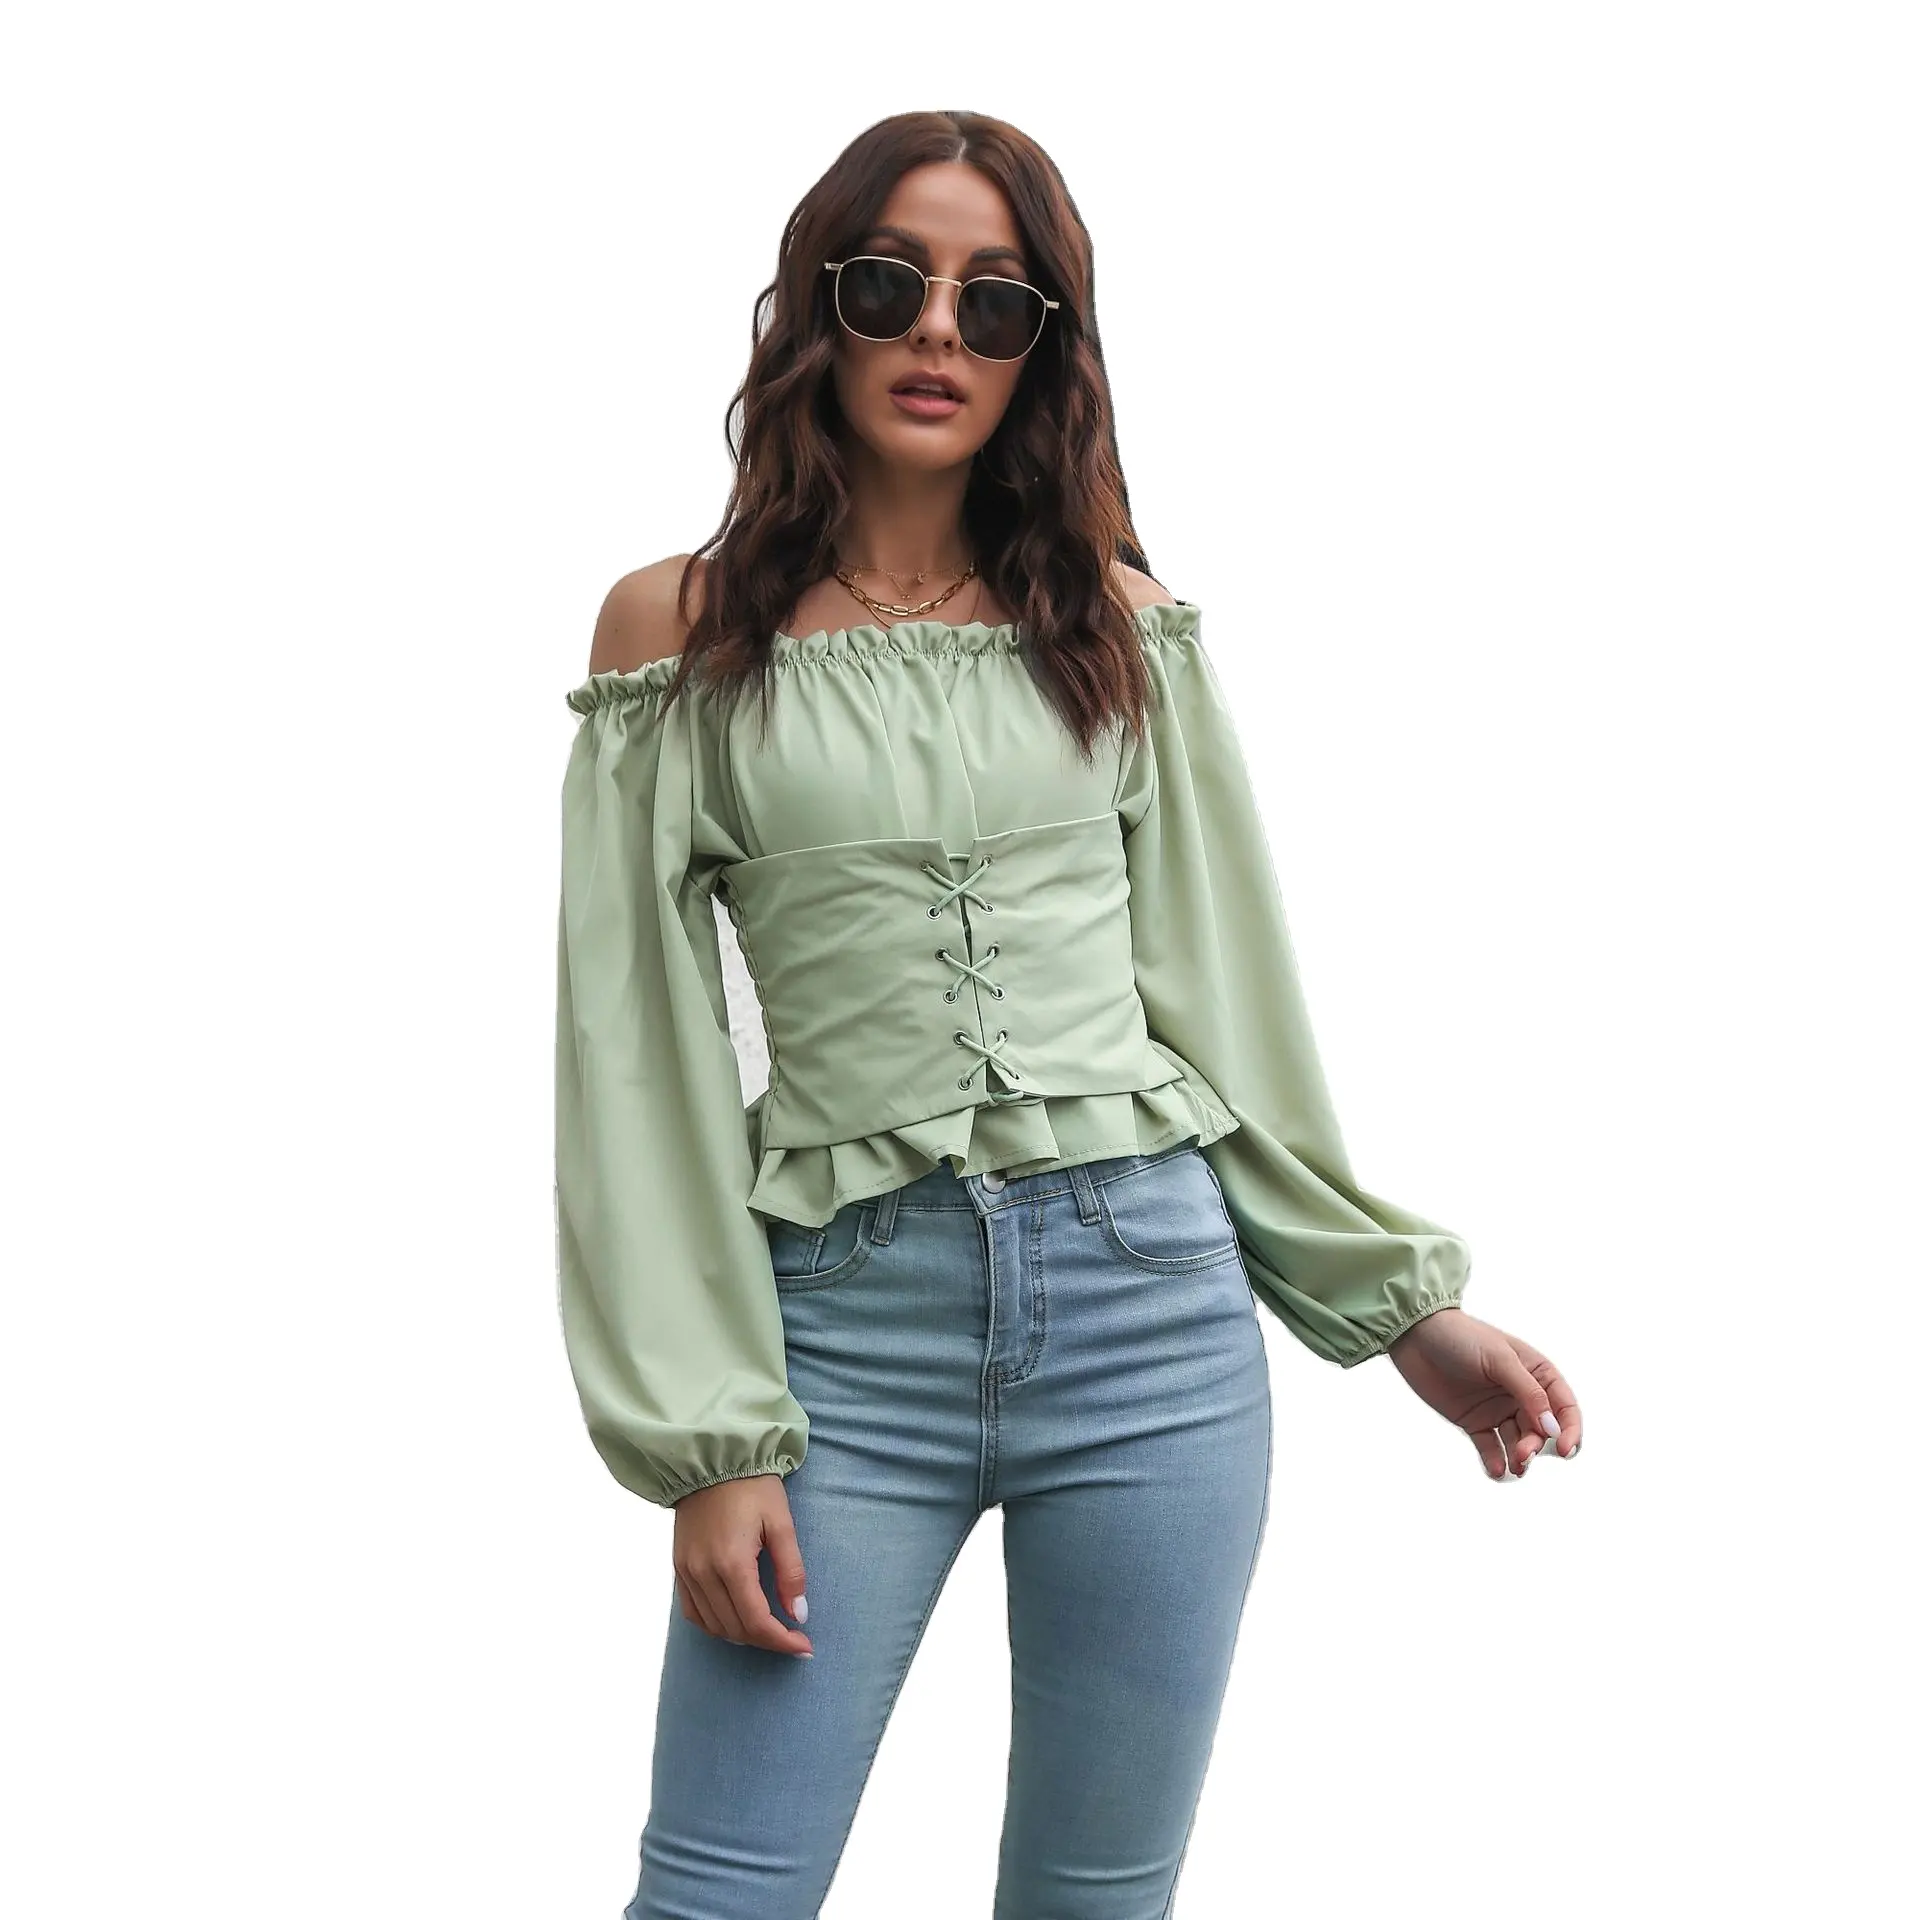 Women Summer Elegant Shirts Casual Oversize Tops off shoulder Sexy Pullover Ruffles bandage summer blouses